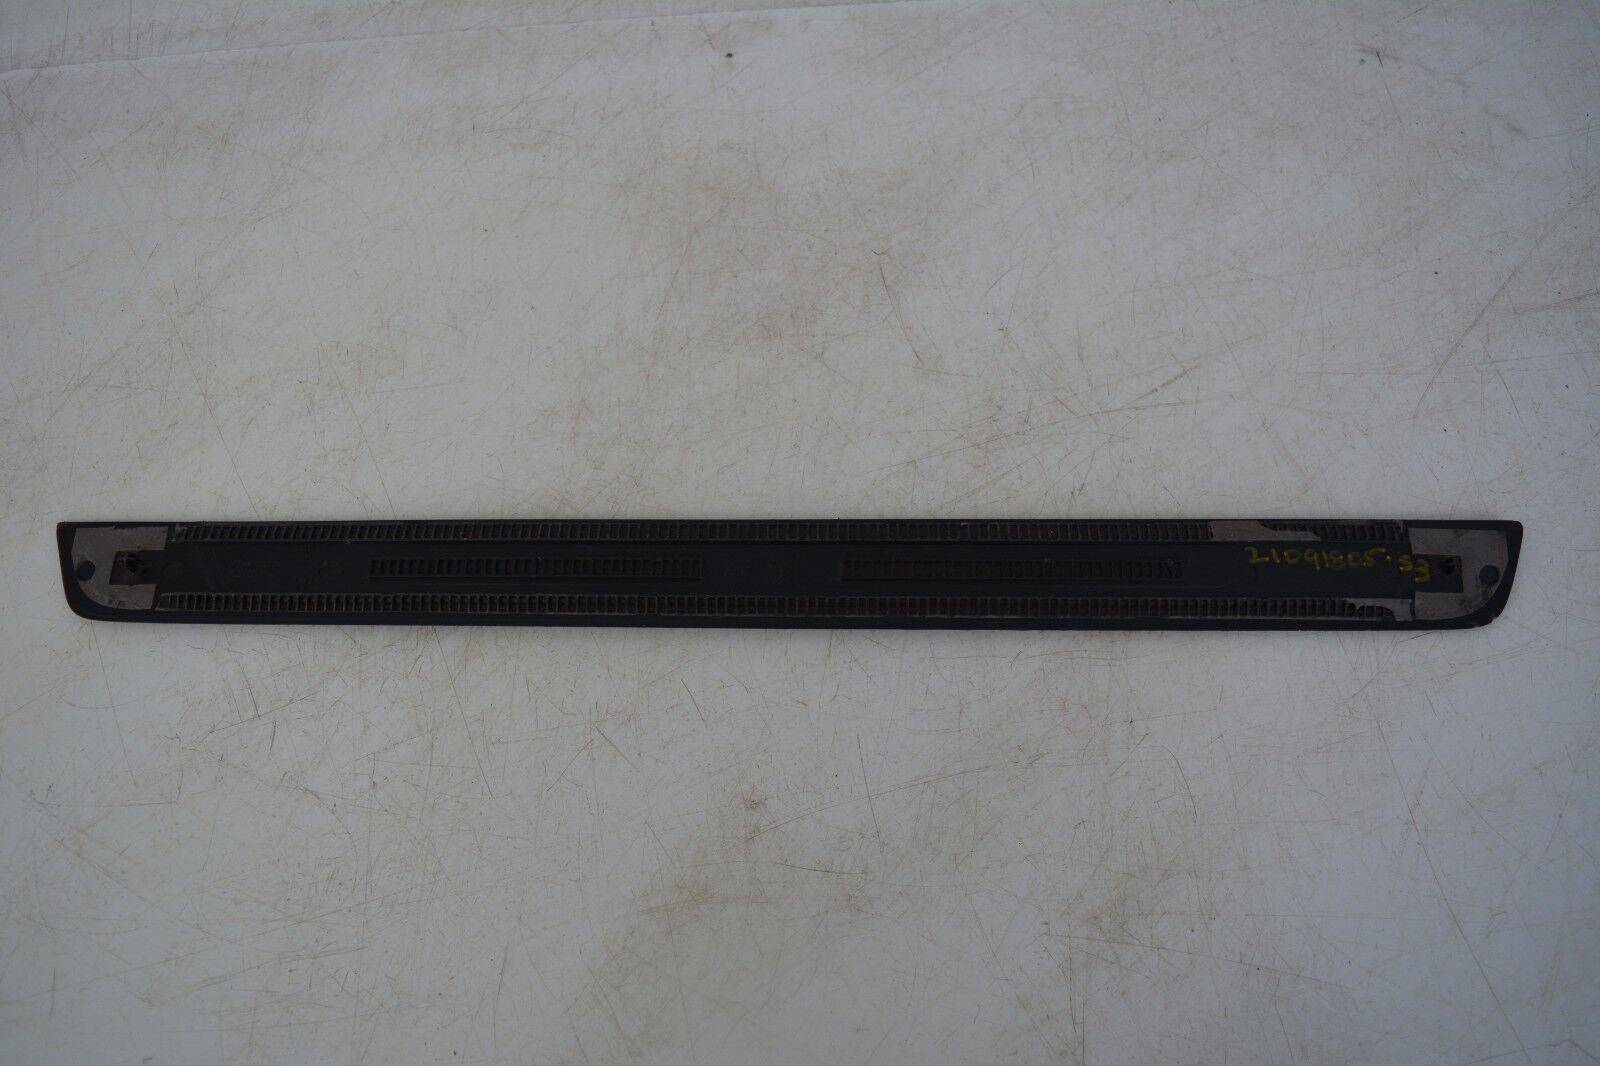 Audi-A4-Door-Sill-Entry-Trim-Front-Left-8W0853373F-Genuine-176469540383-6